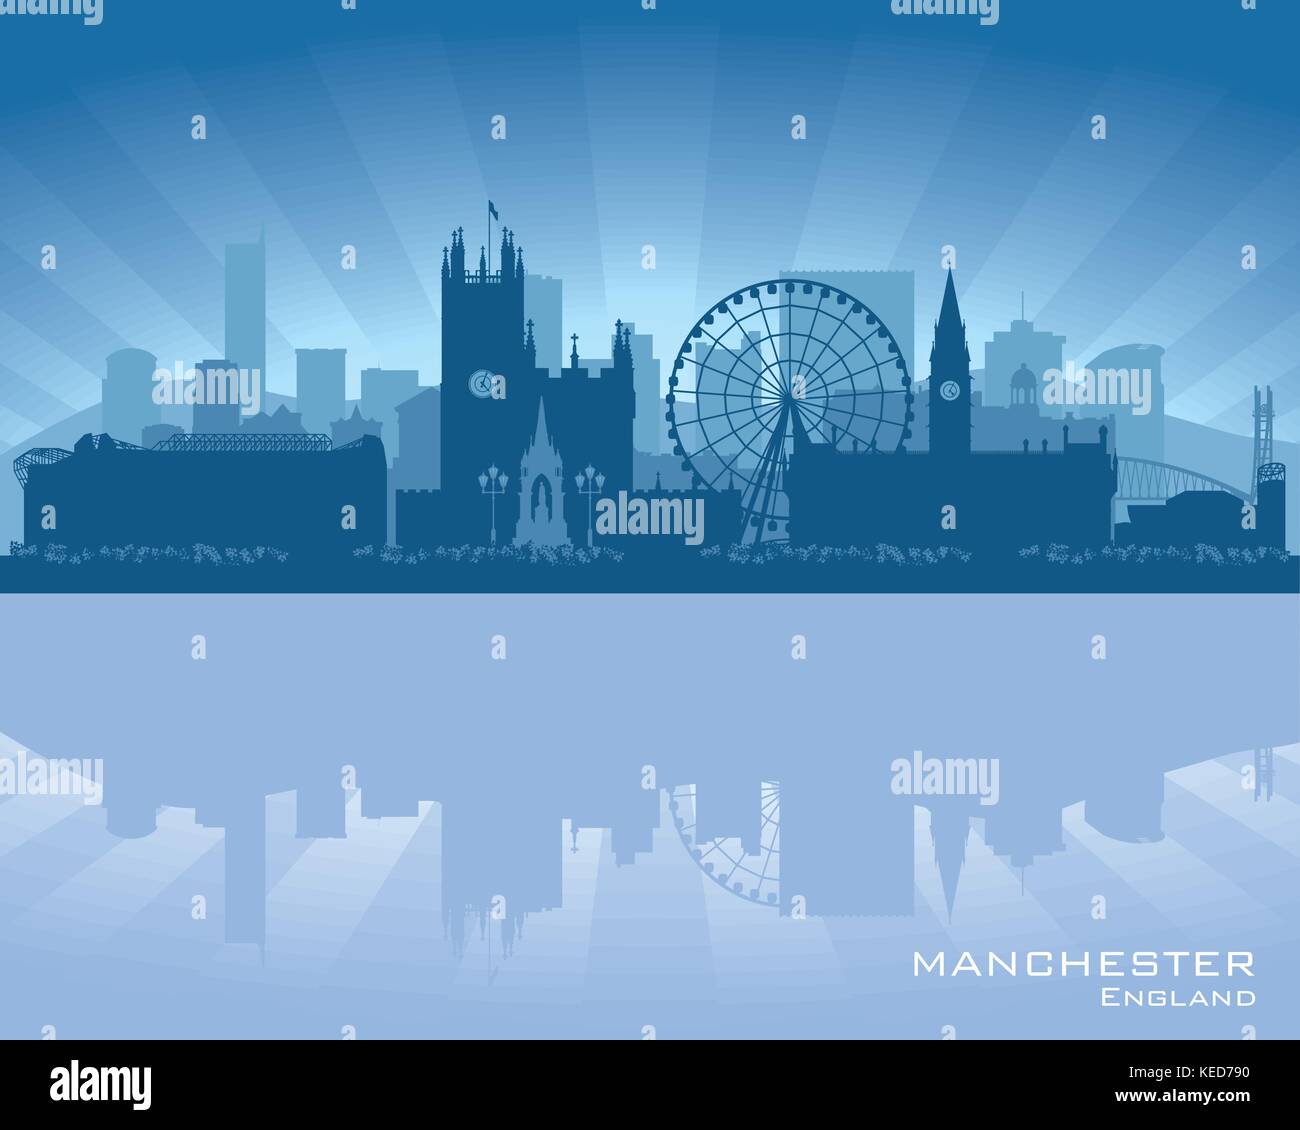 Manchester, England skyline with reflection in water Stock Vector